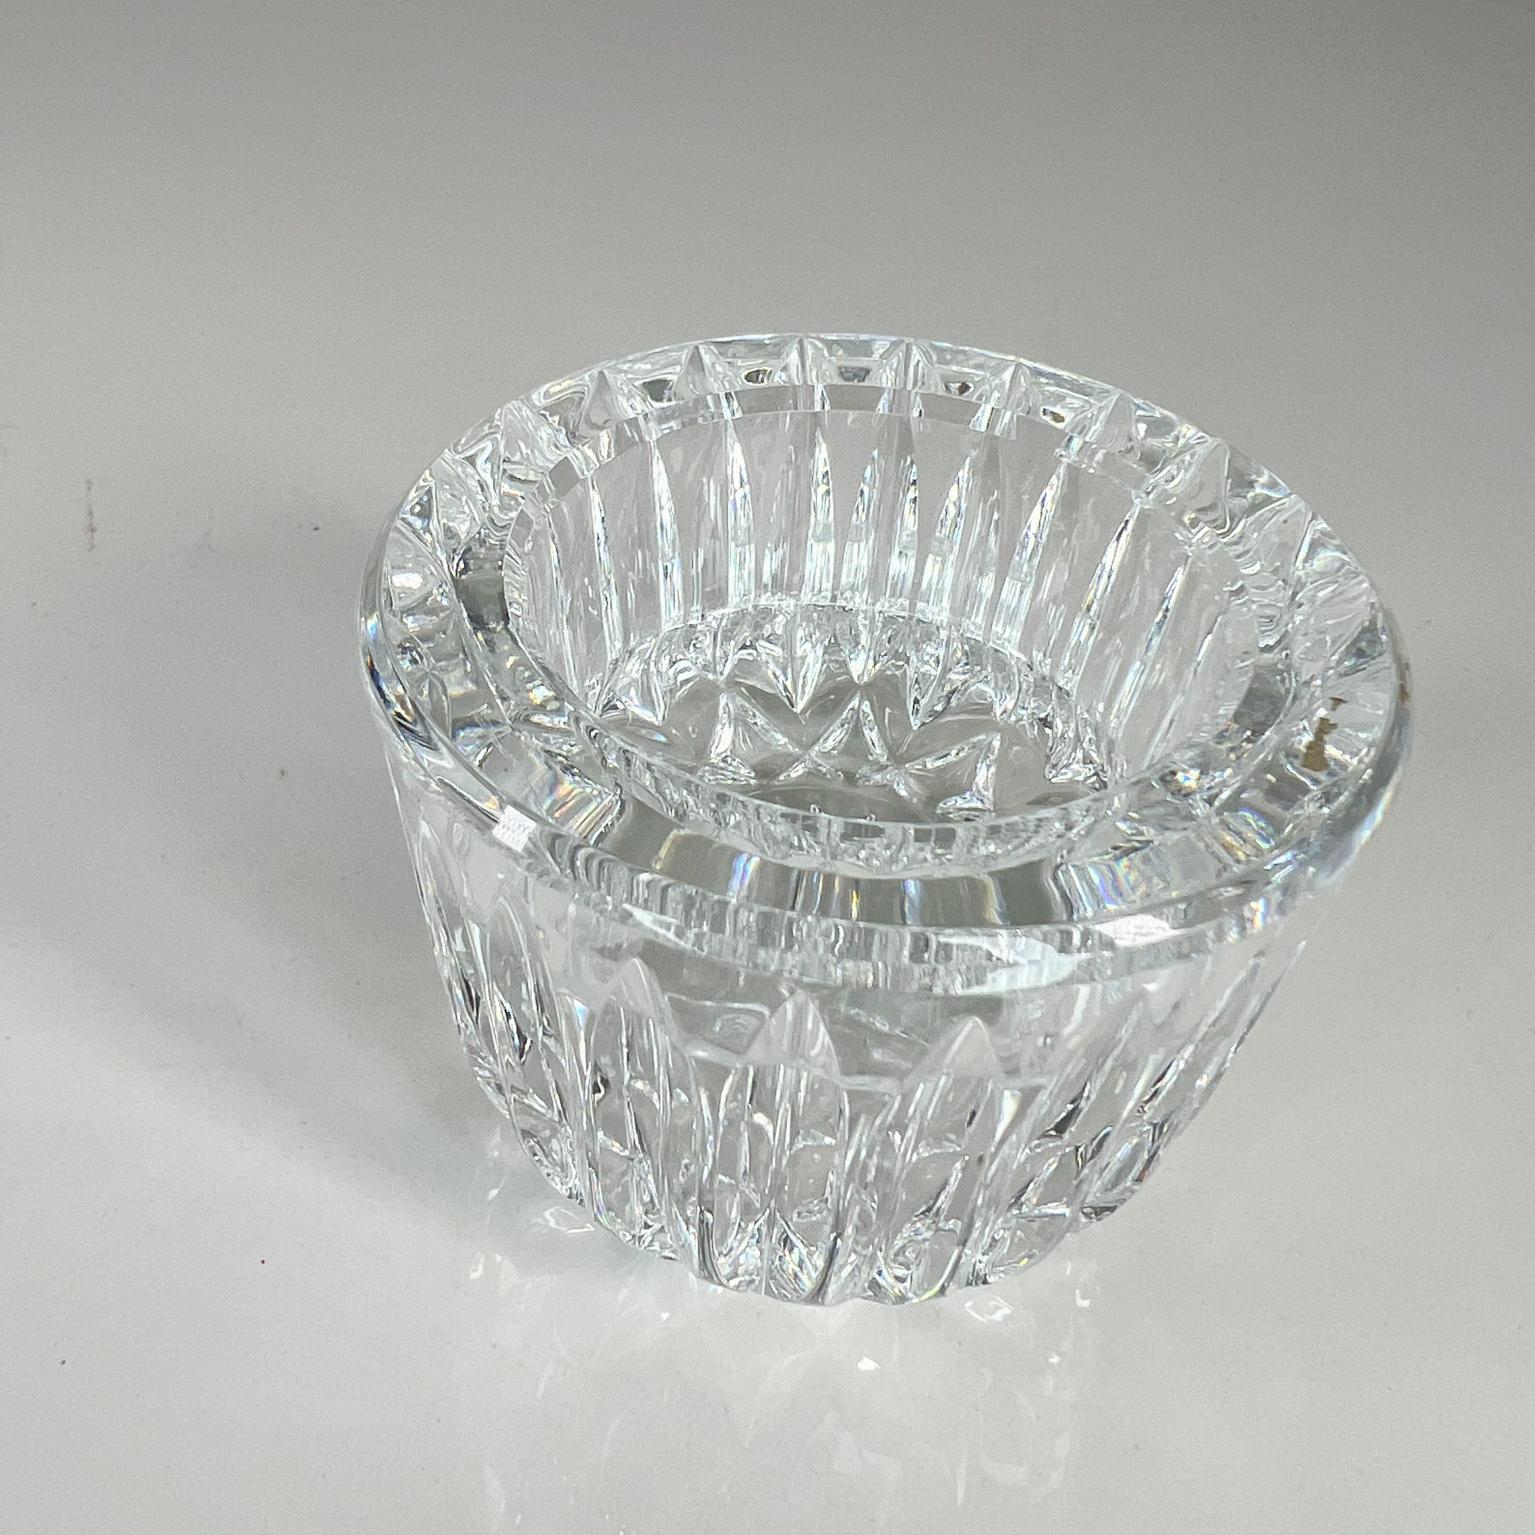 Candle holder
Simply elegant Waterford cut crystal glass votive tealight candle holder anya
Signed by maker
Measures: Approximately 3 diameter x 2.25 height
Preowned original vintage good condition.
Refer to images provided please.